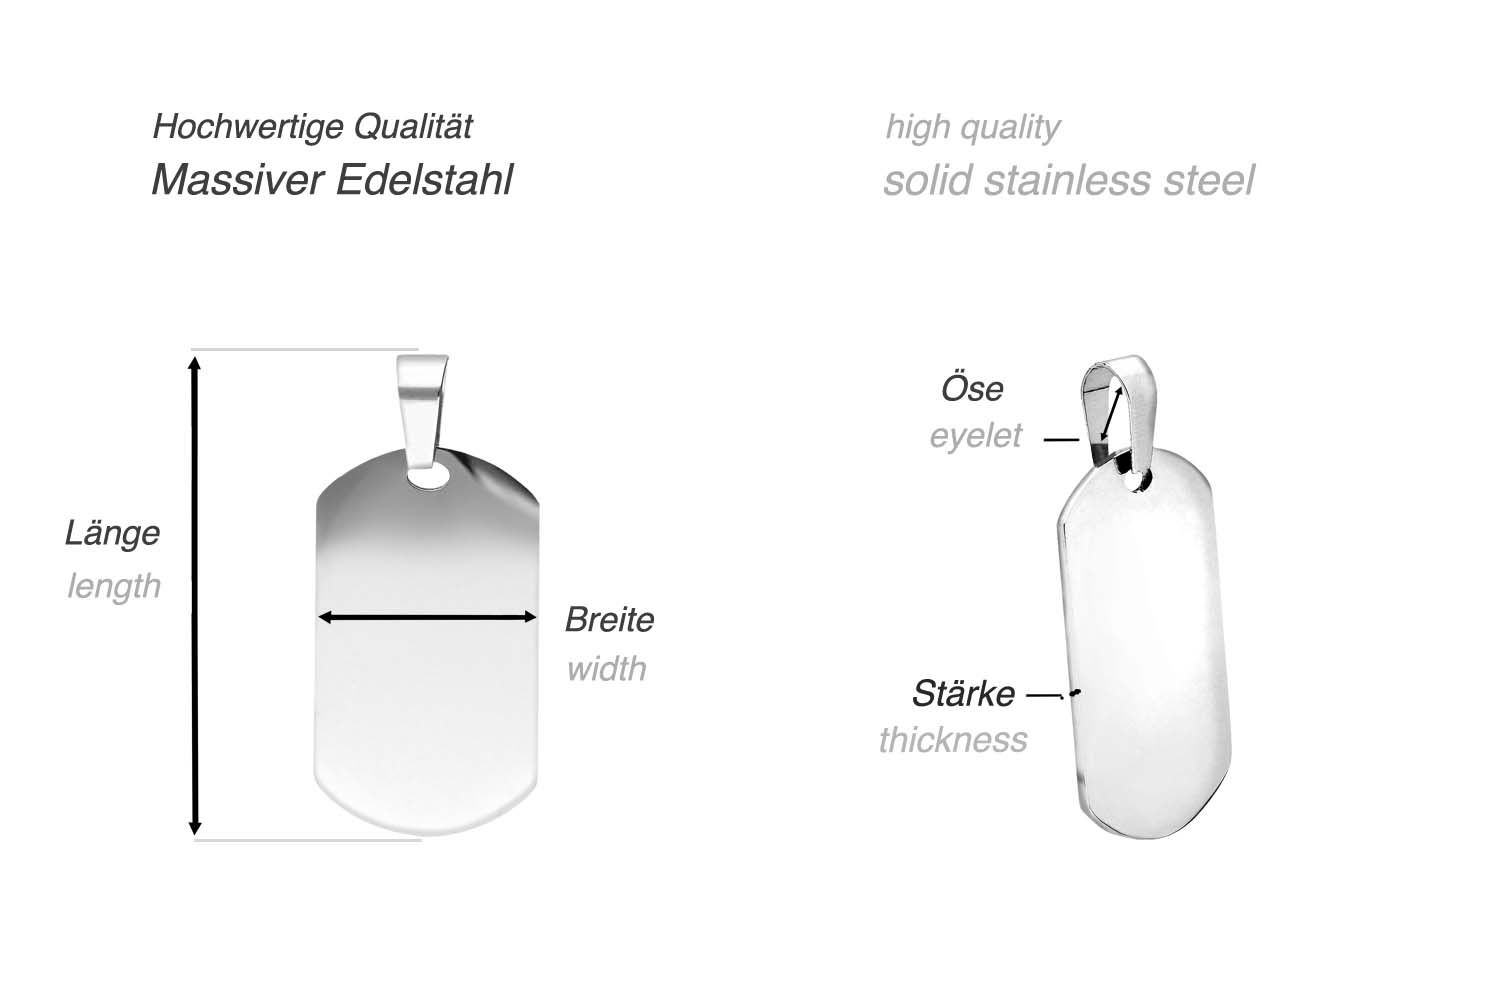 Stainless steel dog tag highly polished / matt